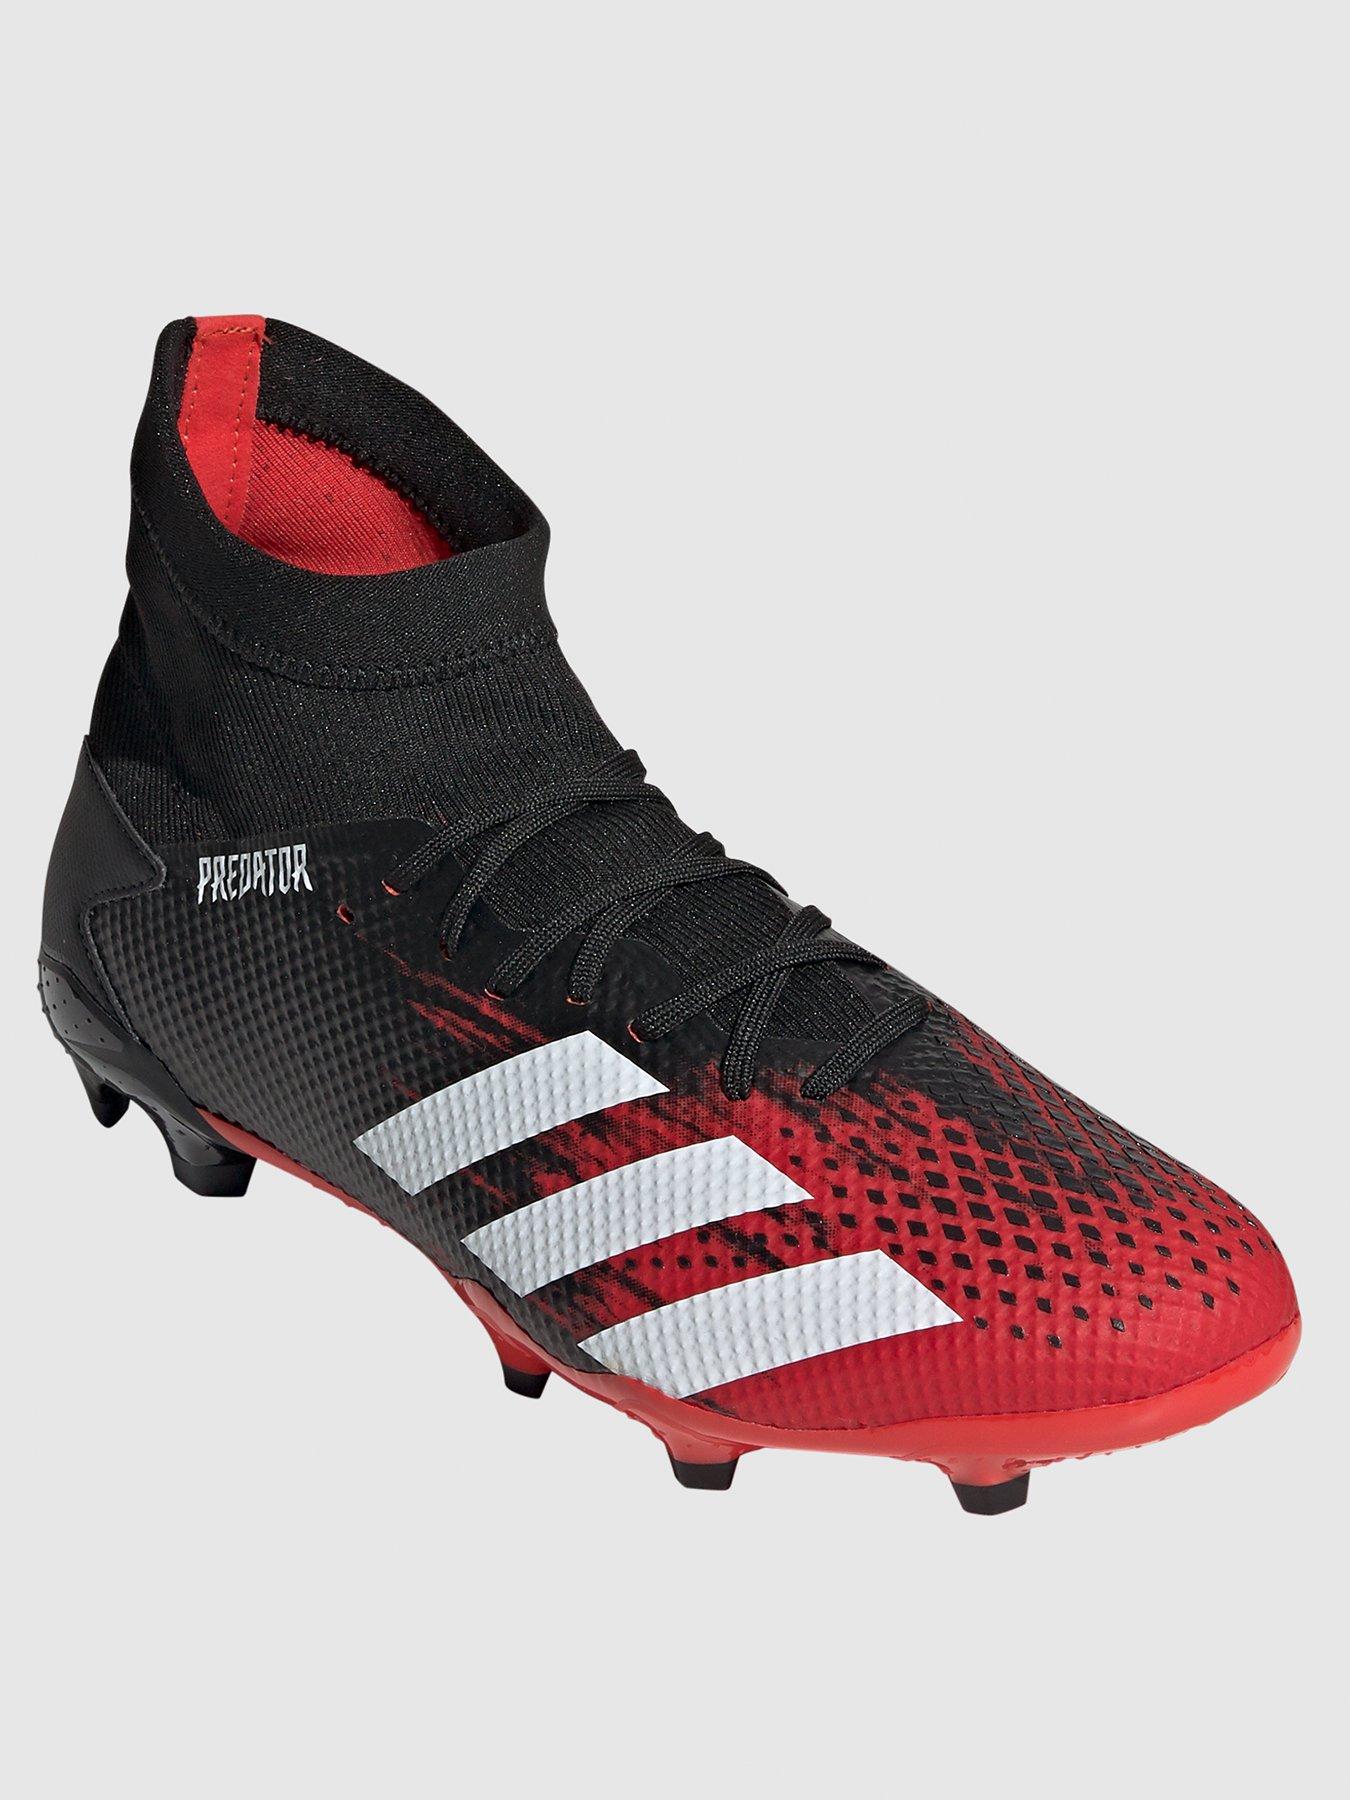 red and black predator football boots